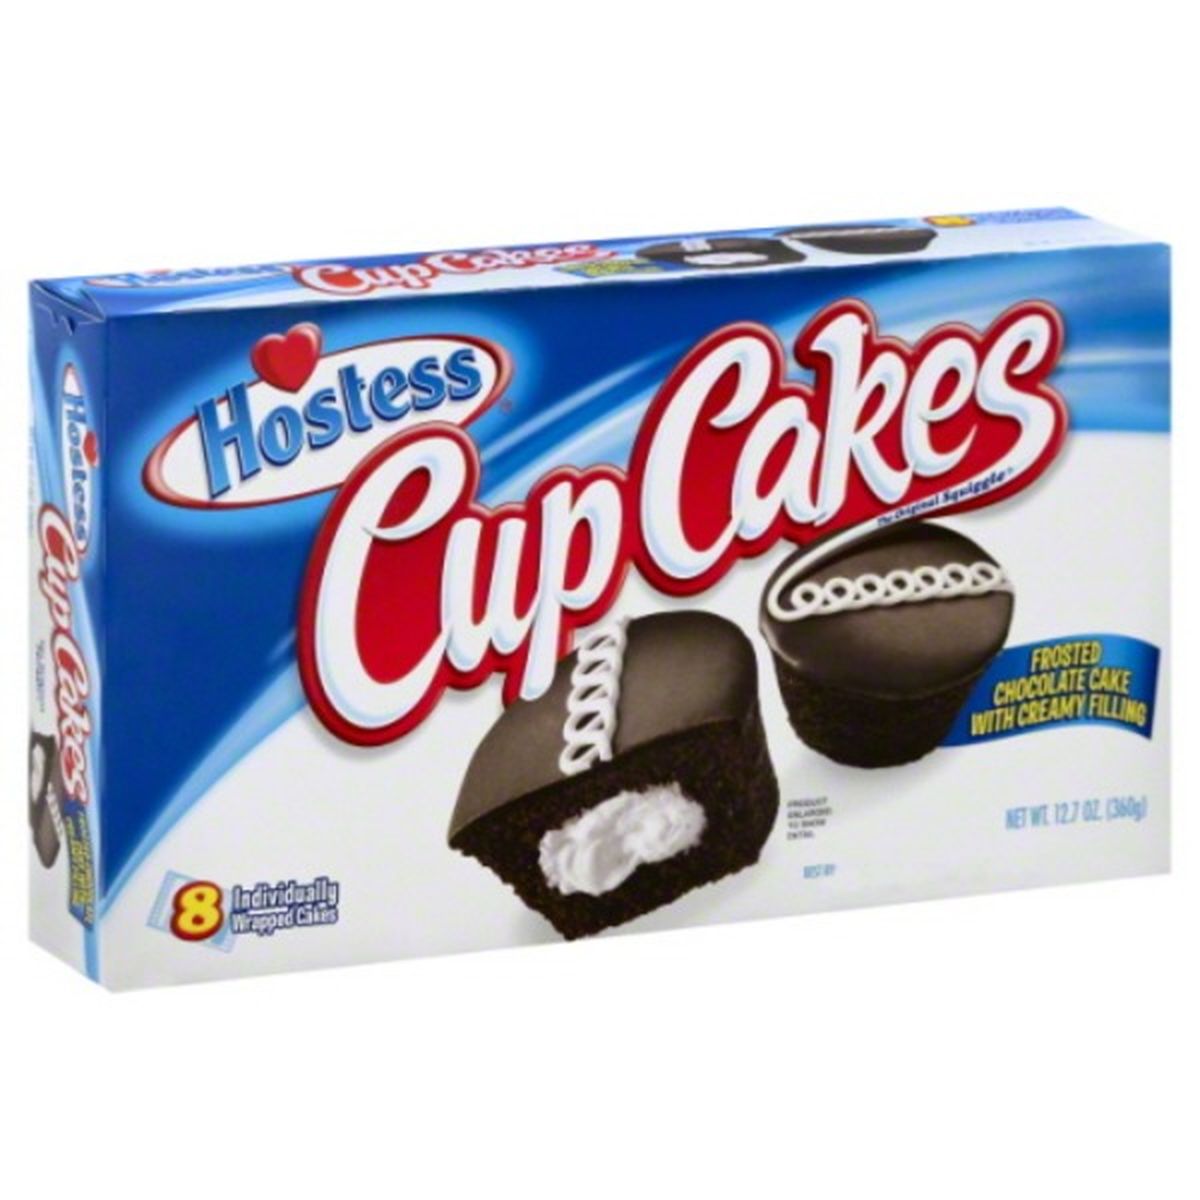 Calories in Hostess Cup Cakes